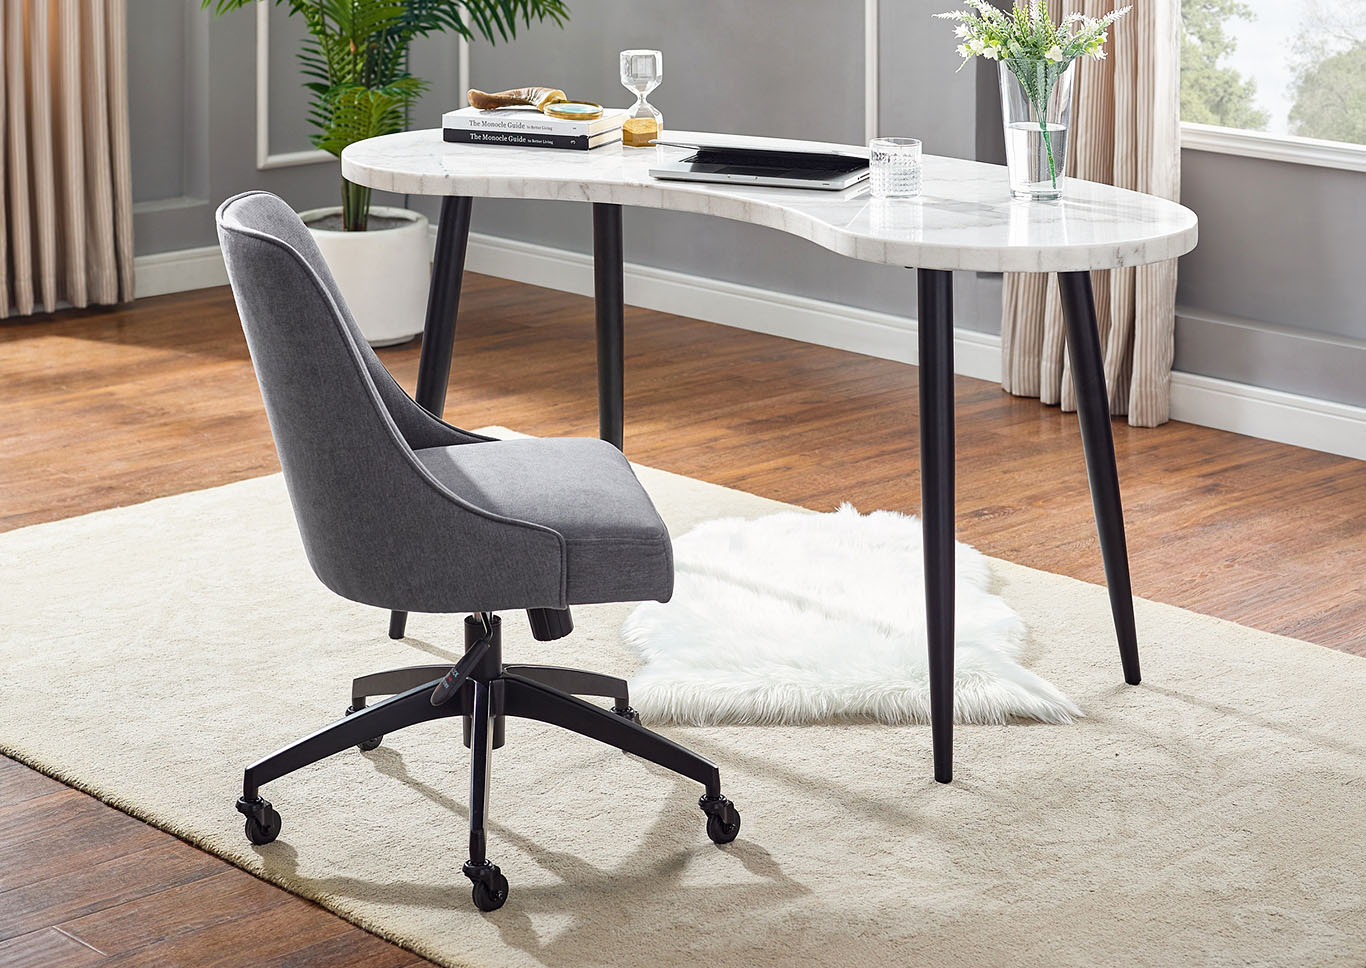 Chair With Built In Desk - YOAHM INSPIRATION